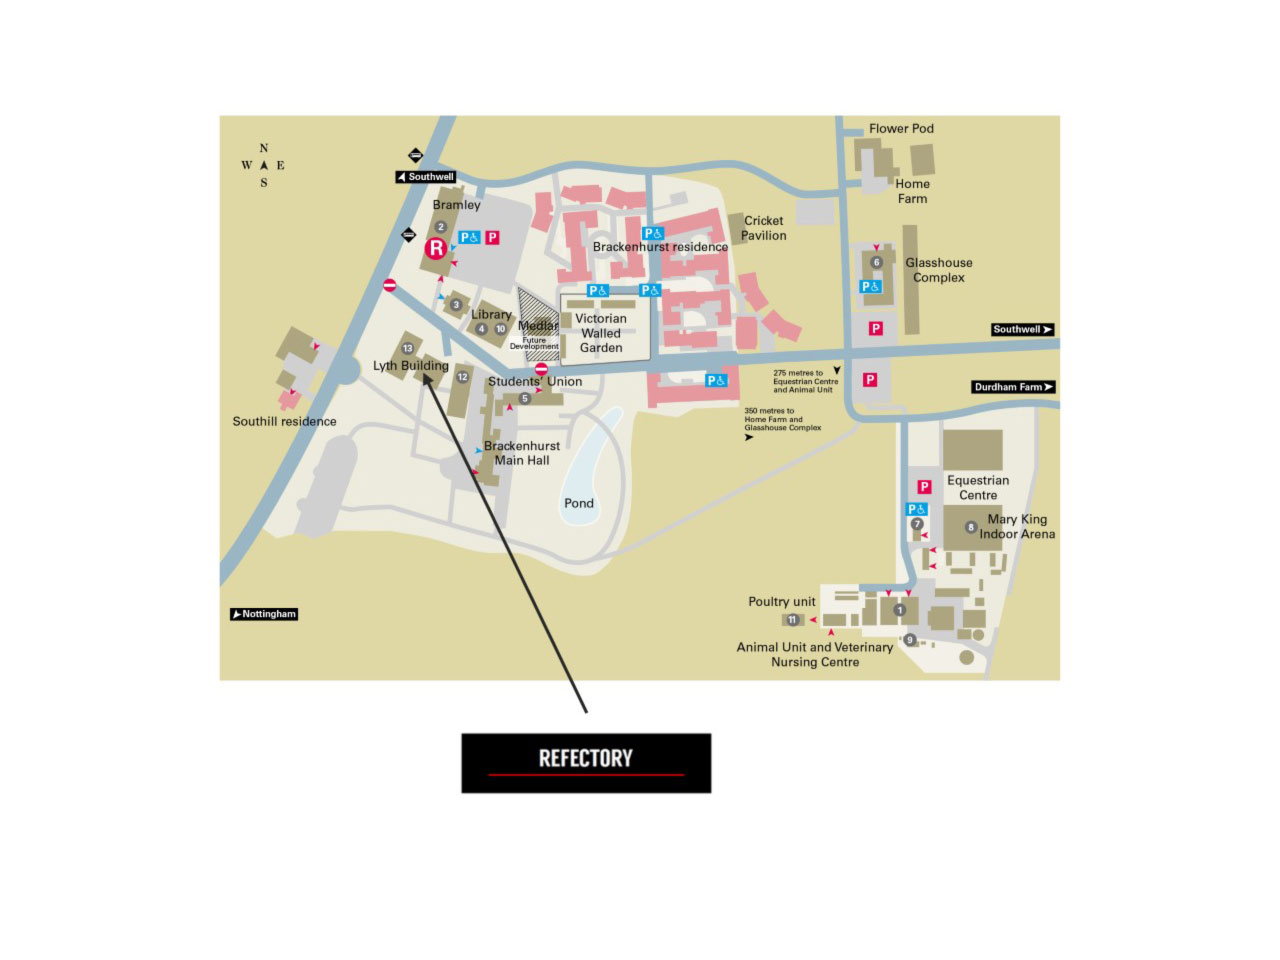 A map showing the location of food outlets on Brackenhurst campus